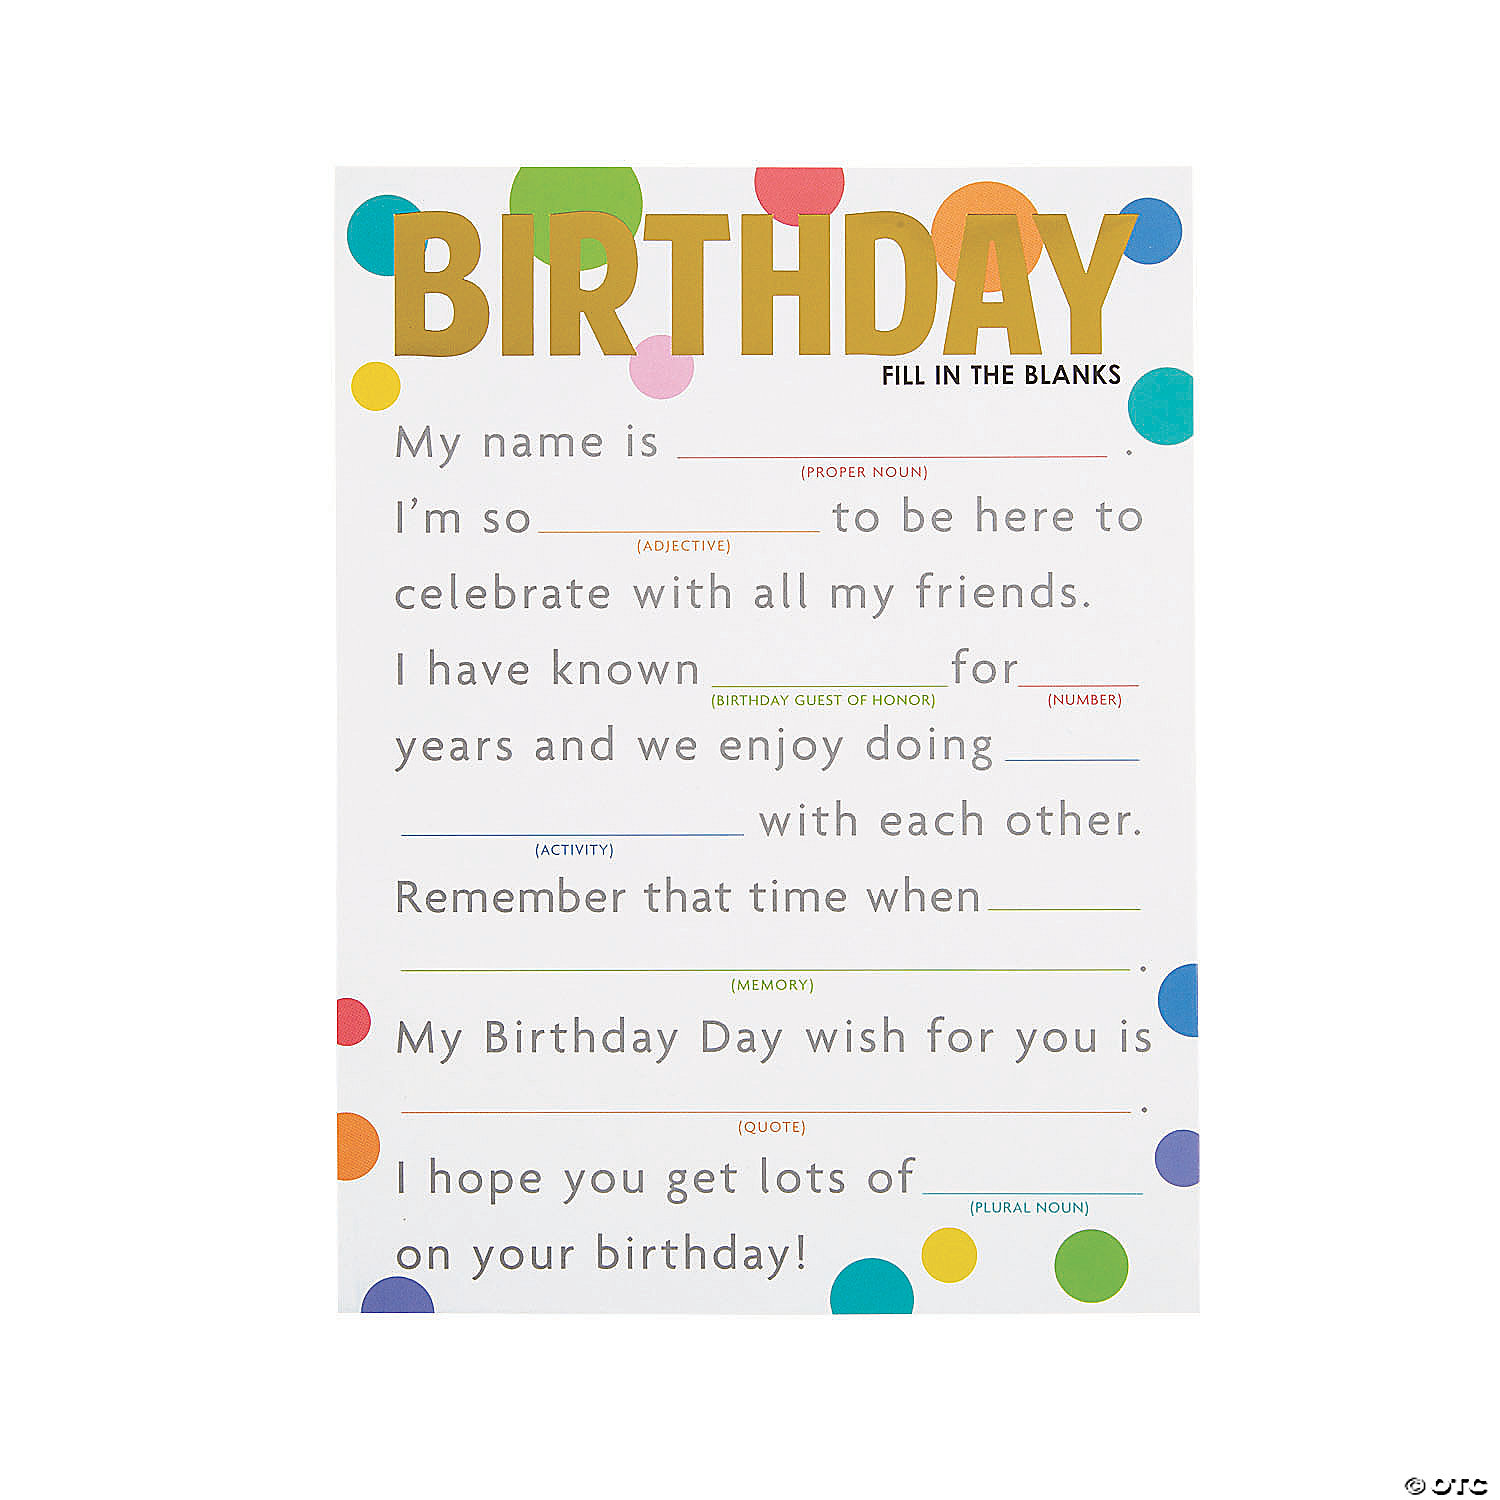 Lionel Green Street Justitie Graveren Birthday Fill-in-the-Blank Game Cards | Oriental Trading